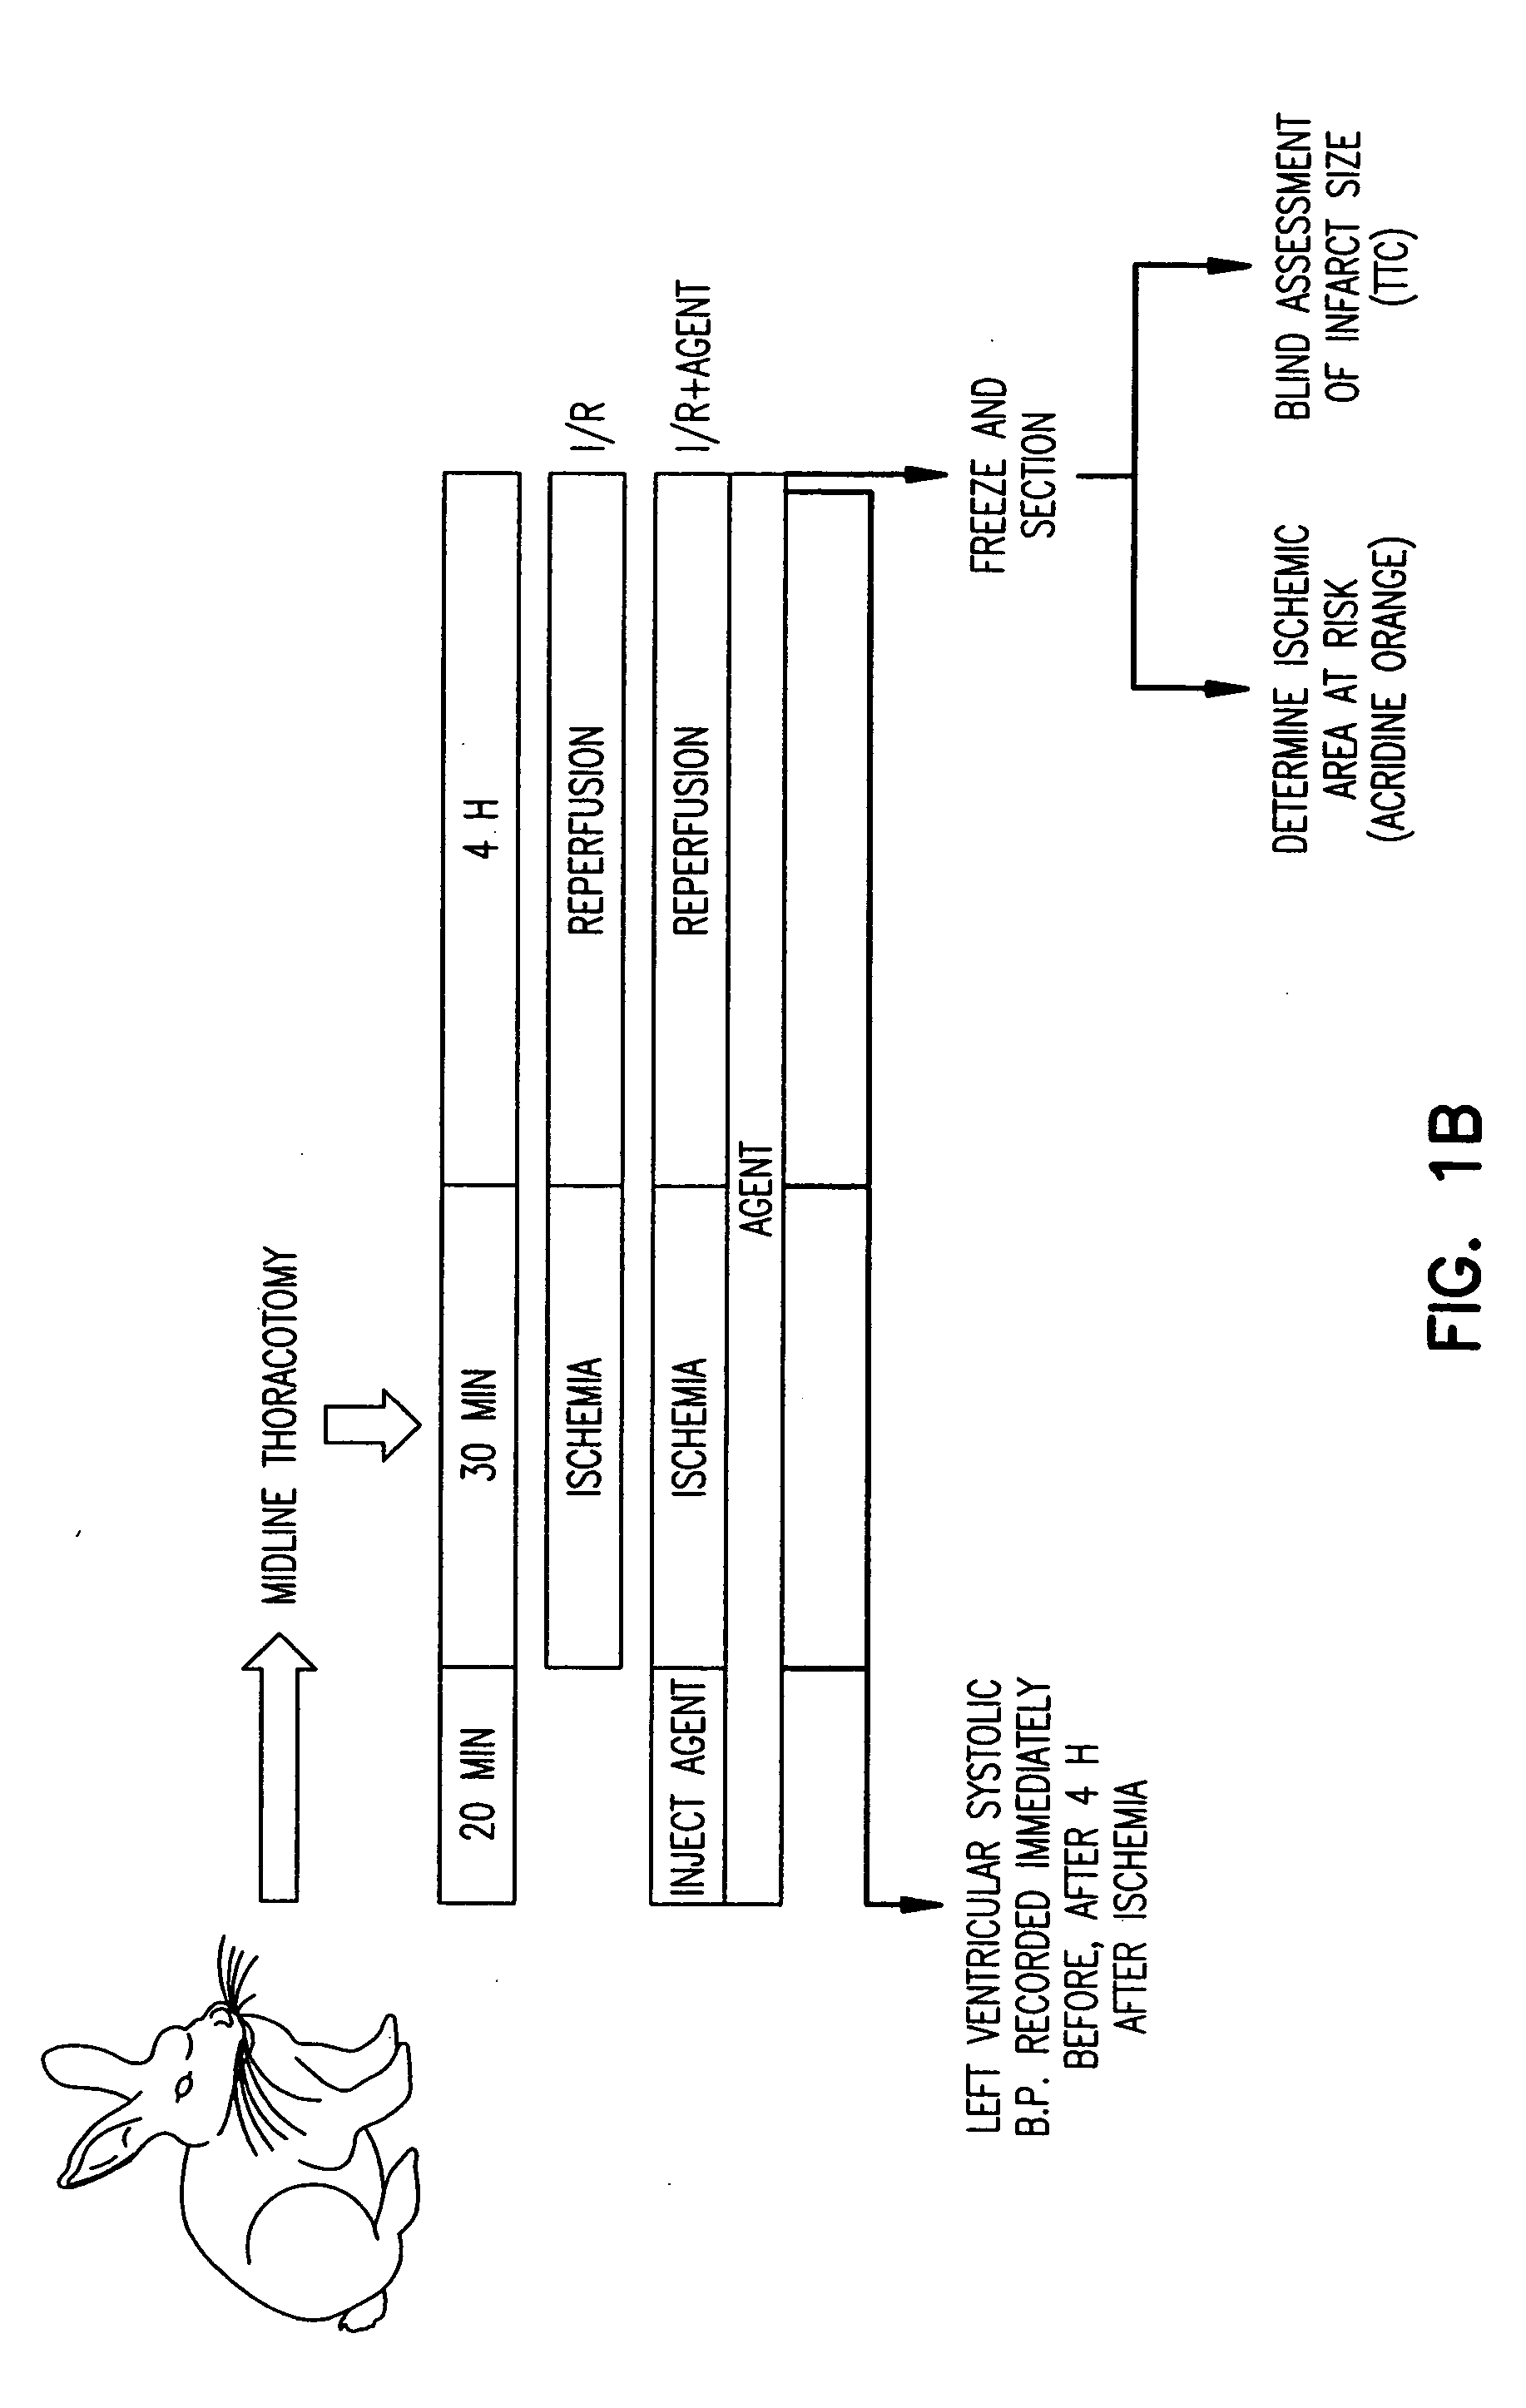 Method to inhibit ischemia and reperfusion injury